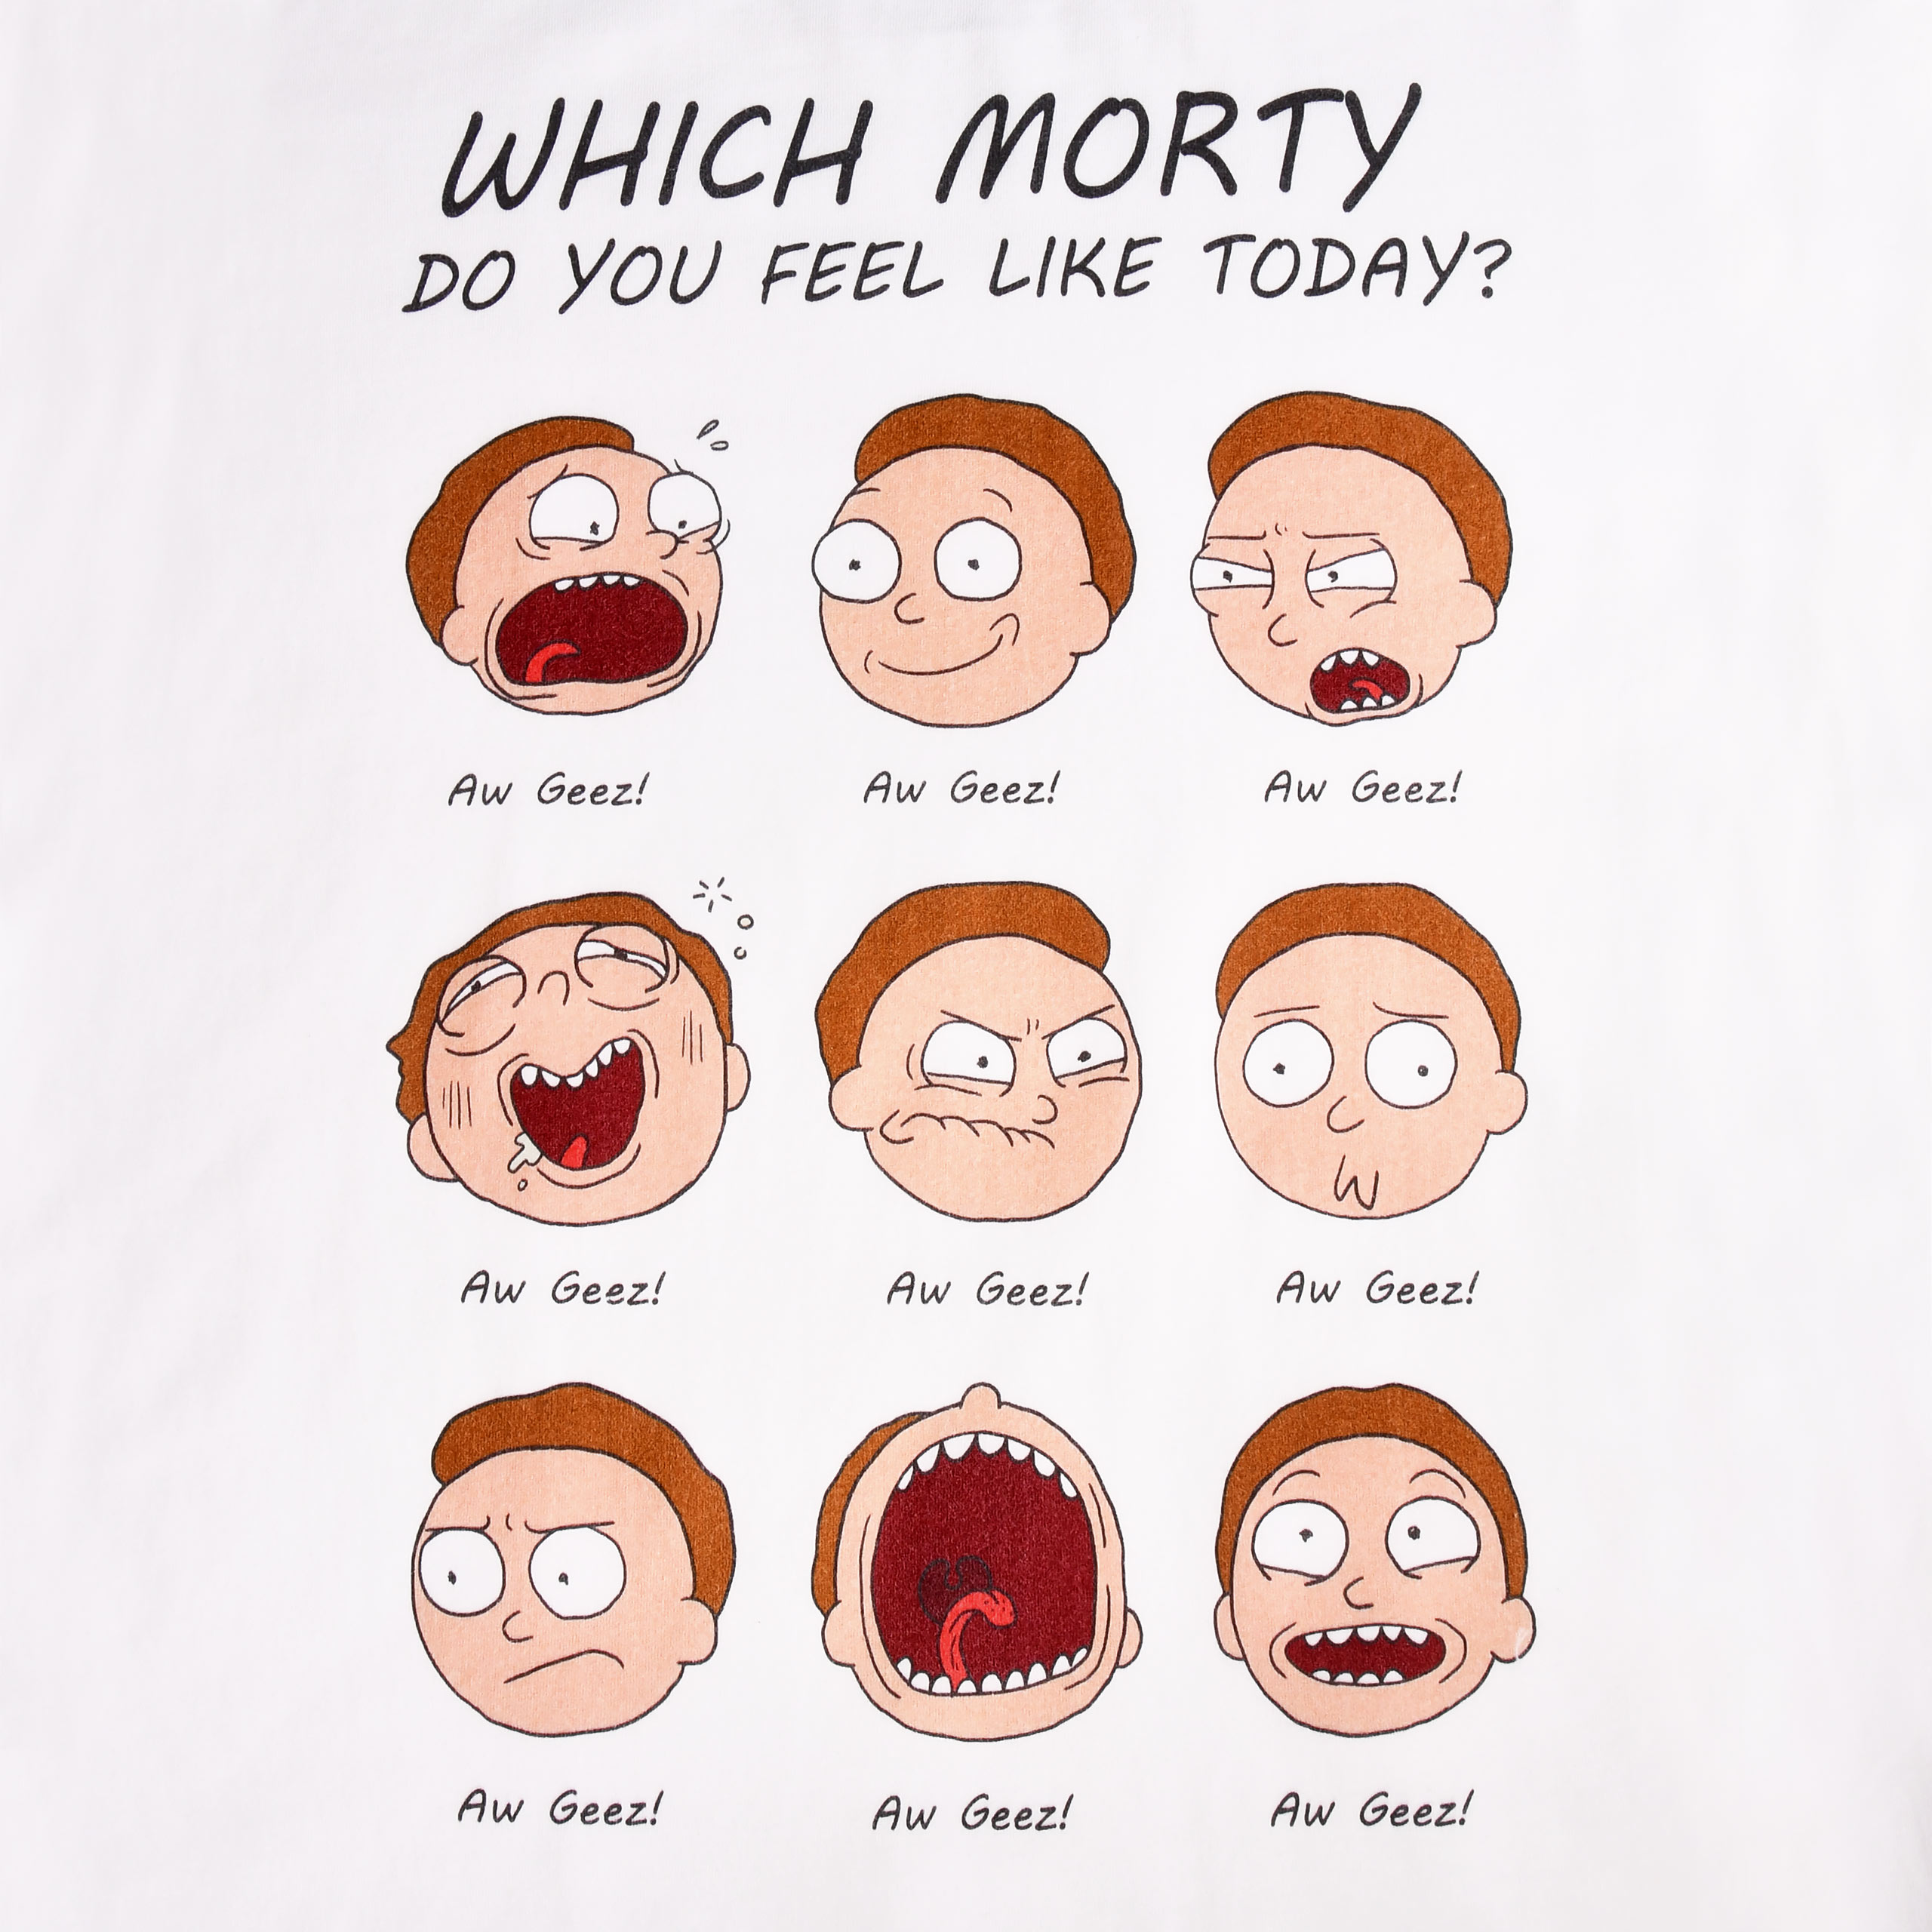 Rick and Morty - Emotion of Morty white T-Shirt